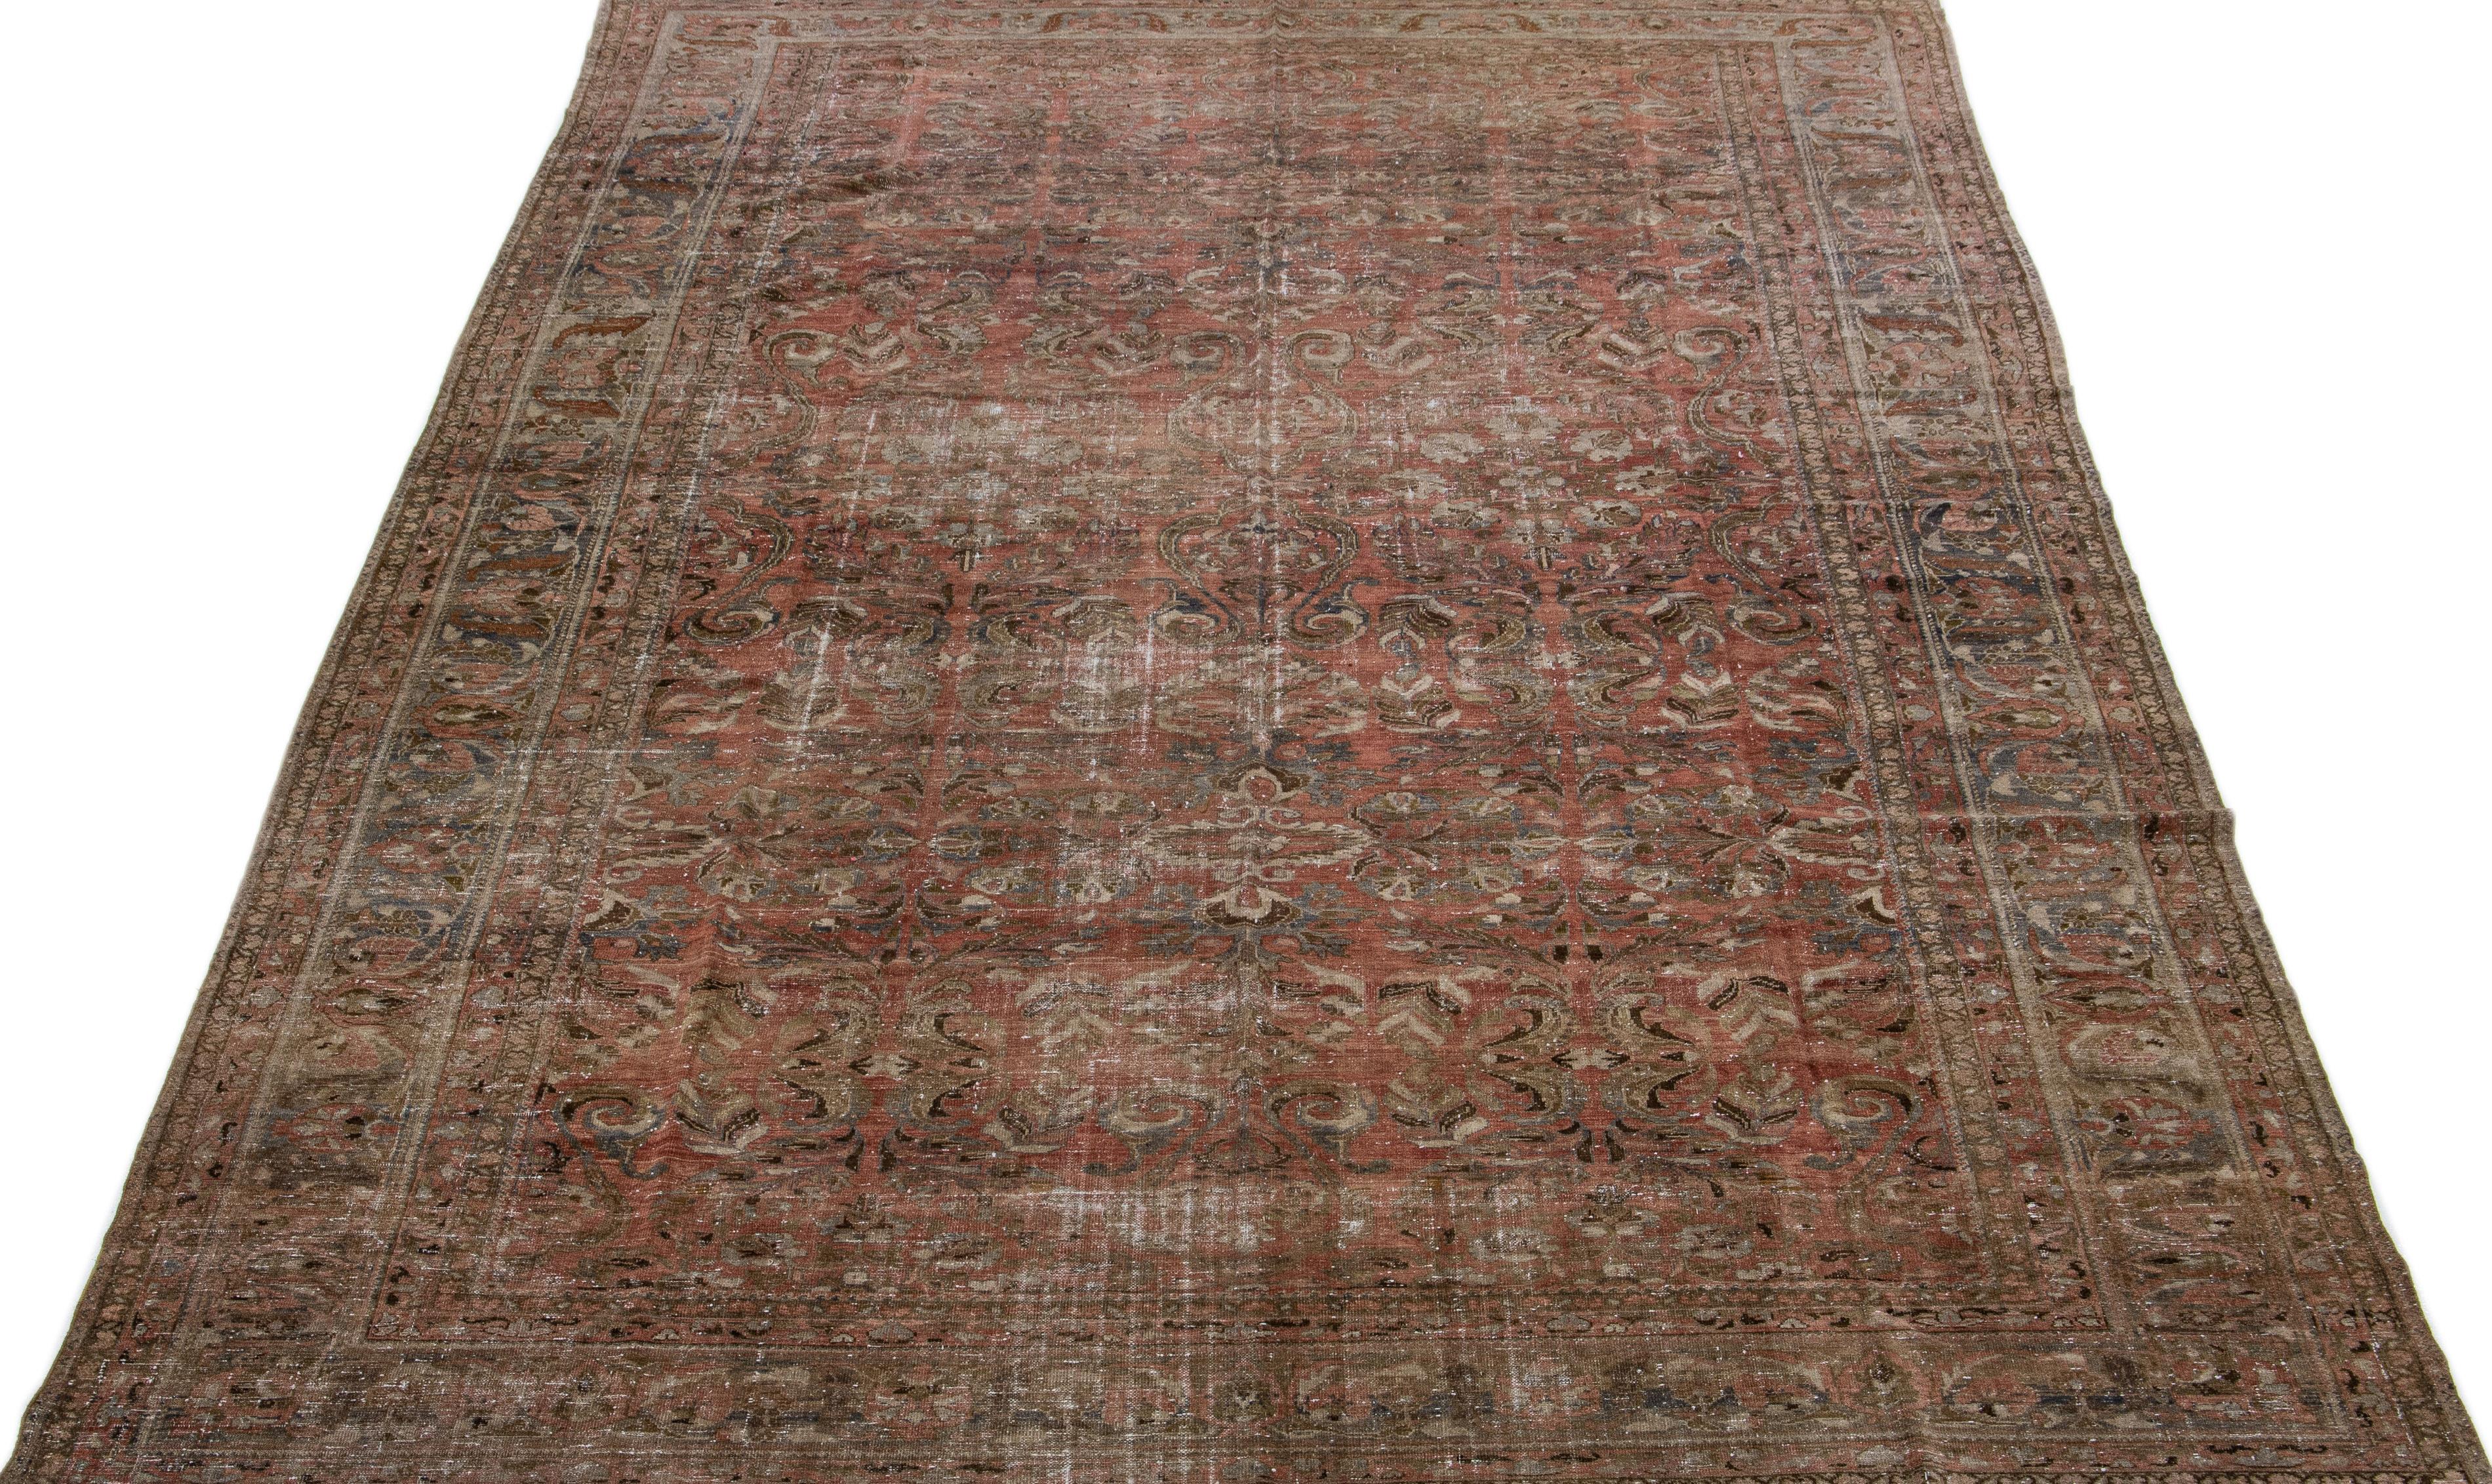 Beautiful Antique Malayer hand-knotted wool rug with a red-rust color field. This Persian rug has gray and brown accents in an all-over floral design.

This rug measures 10'2